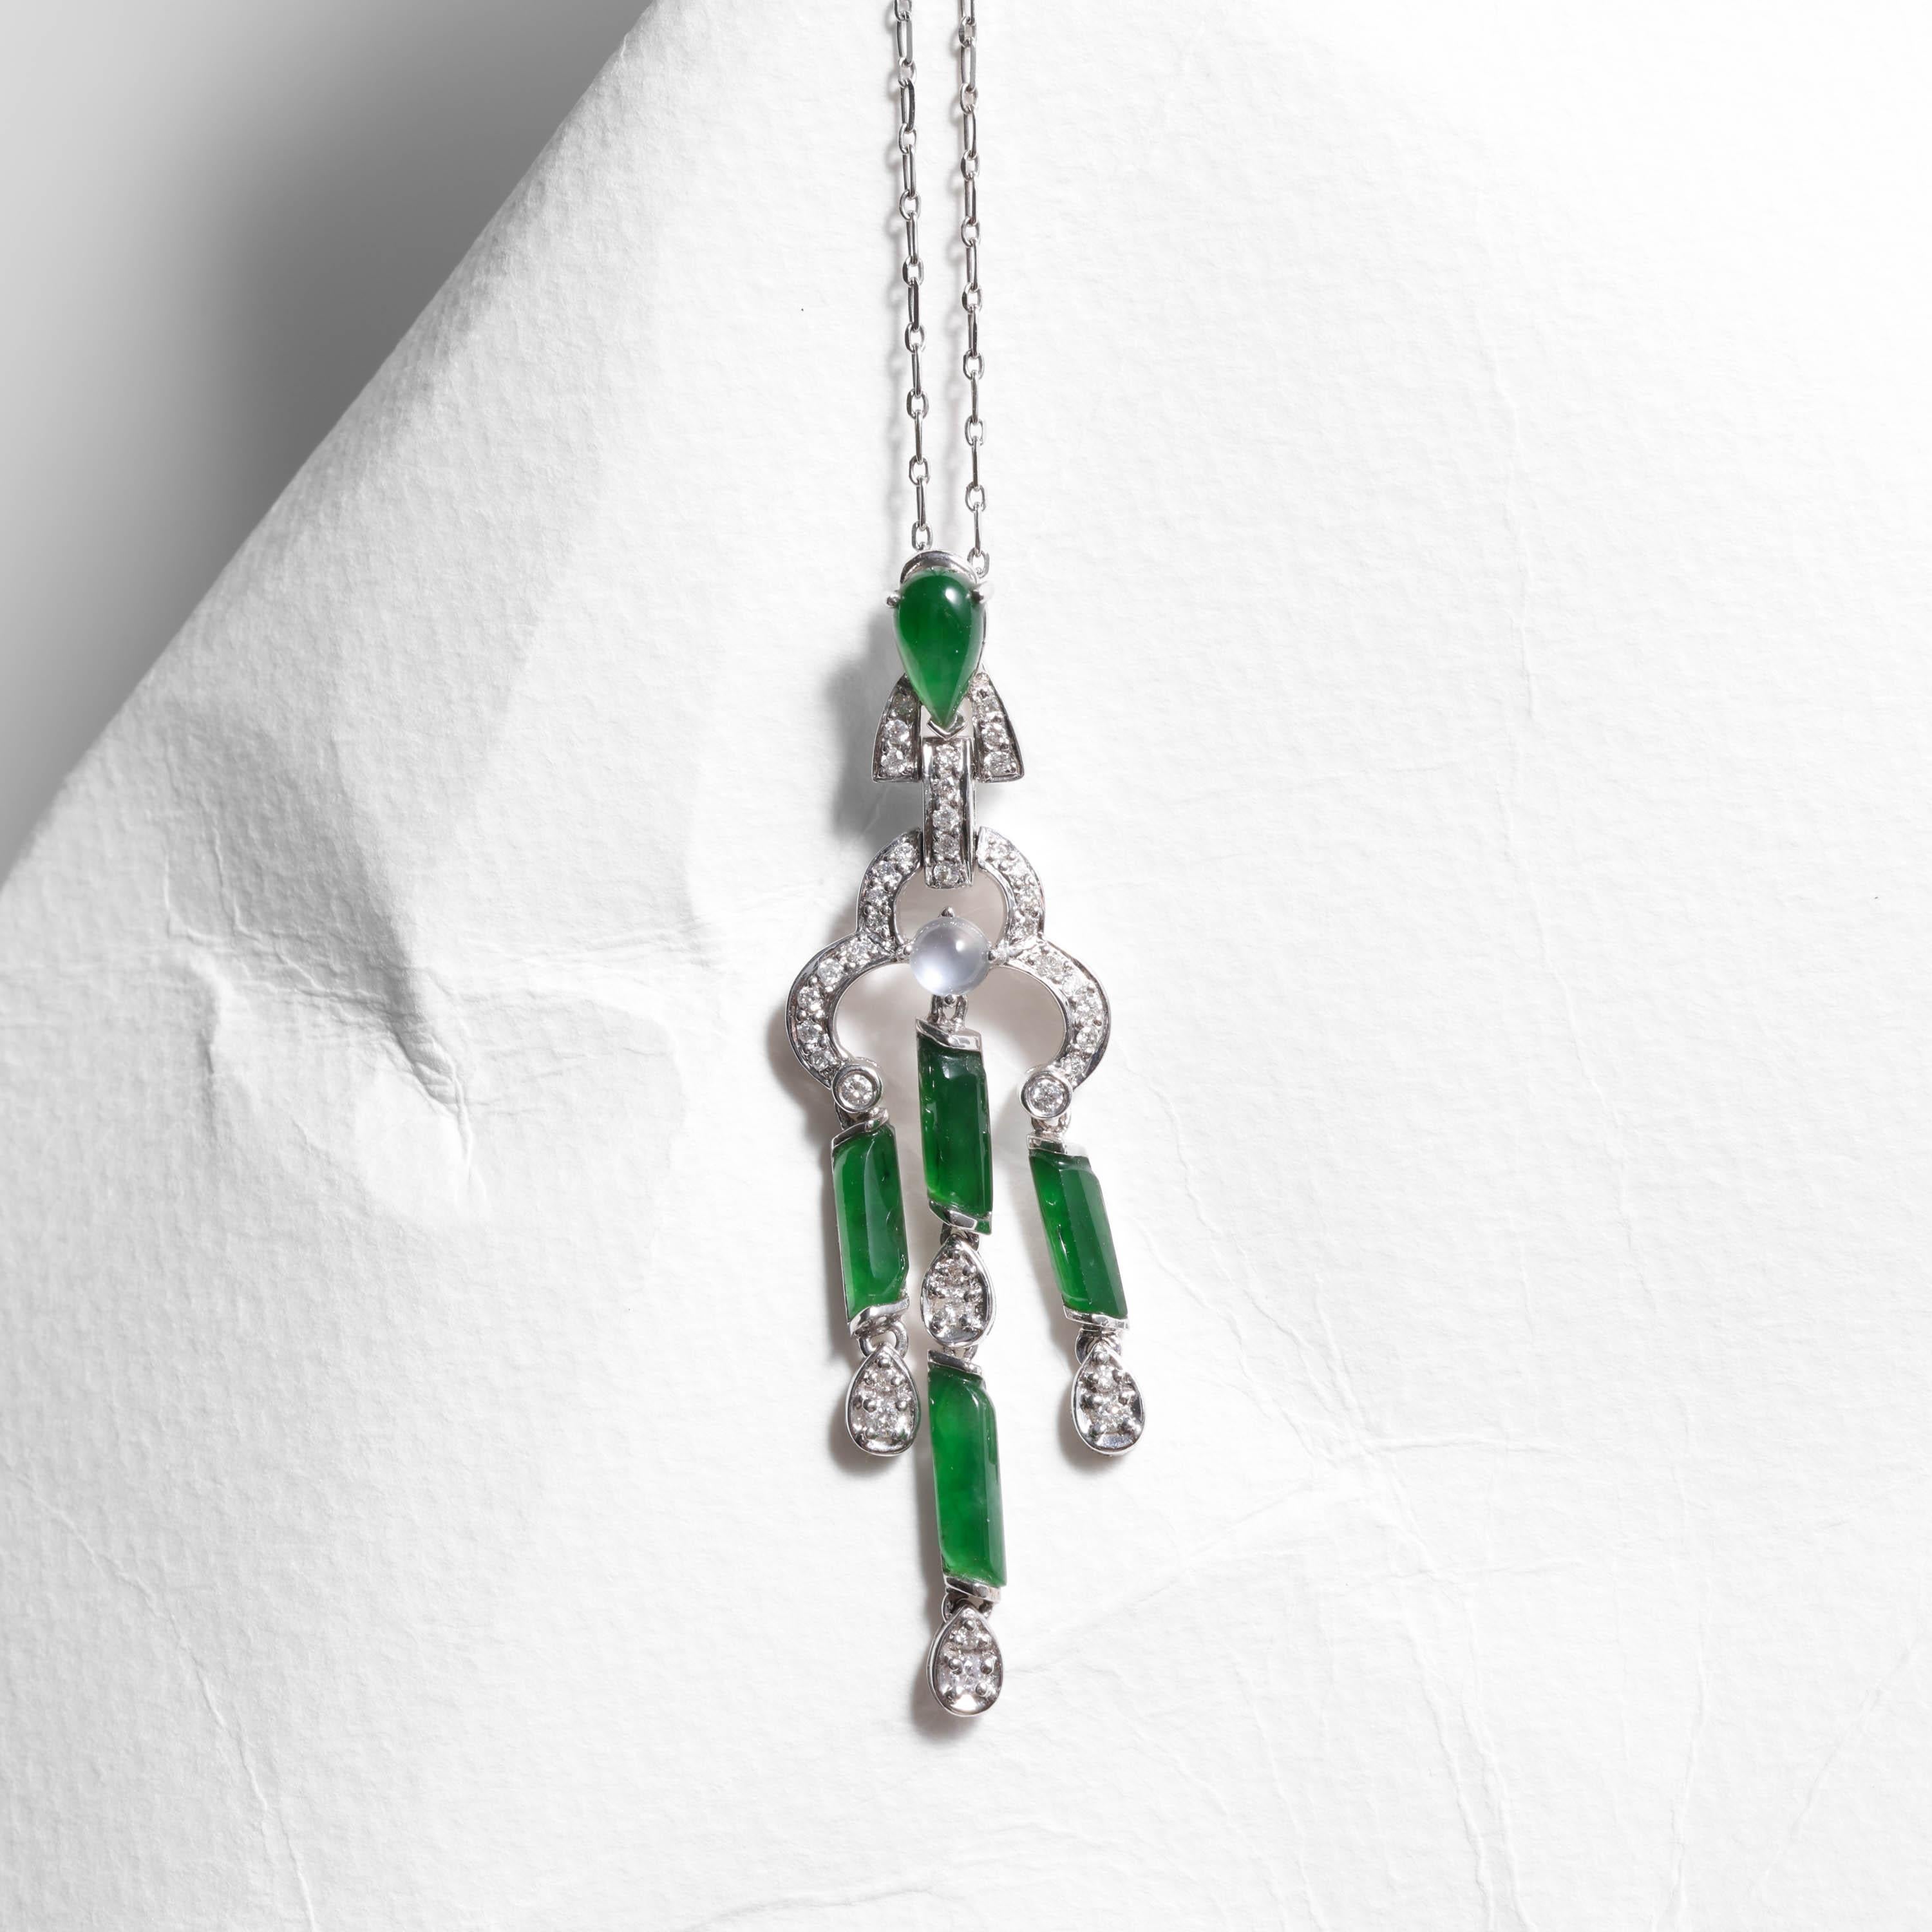 This delightful and one-of-a-kind pendant is rather like a tassel made of 18K white gold and imperial jade; the elongated free-form cabochons of glassy green jade dangle freely, as do the diamonds suspended from the jade. The result is a pendant